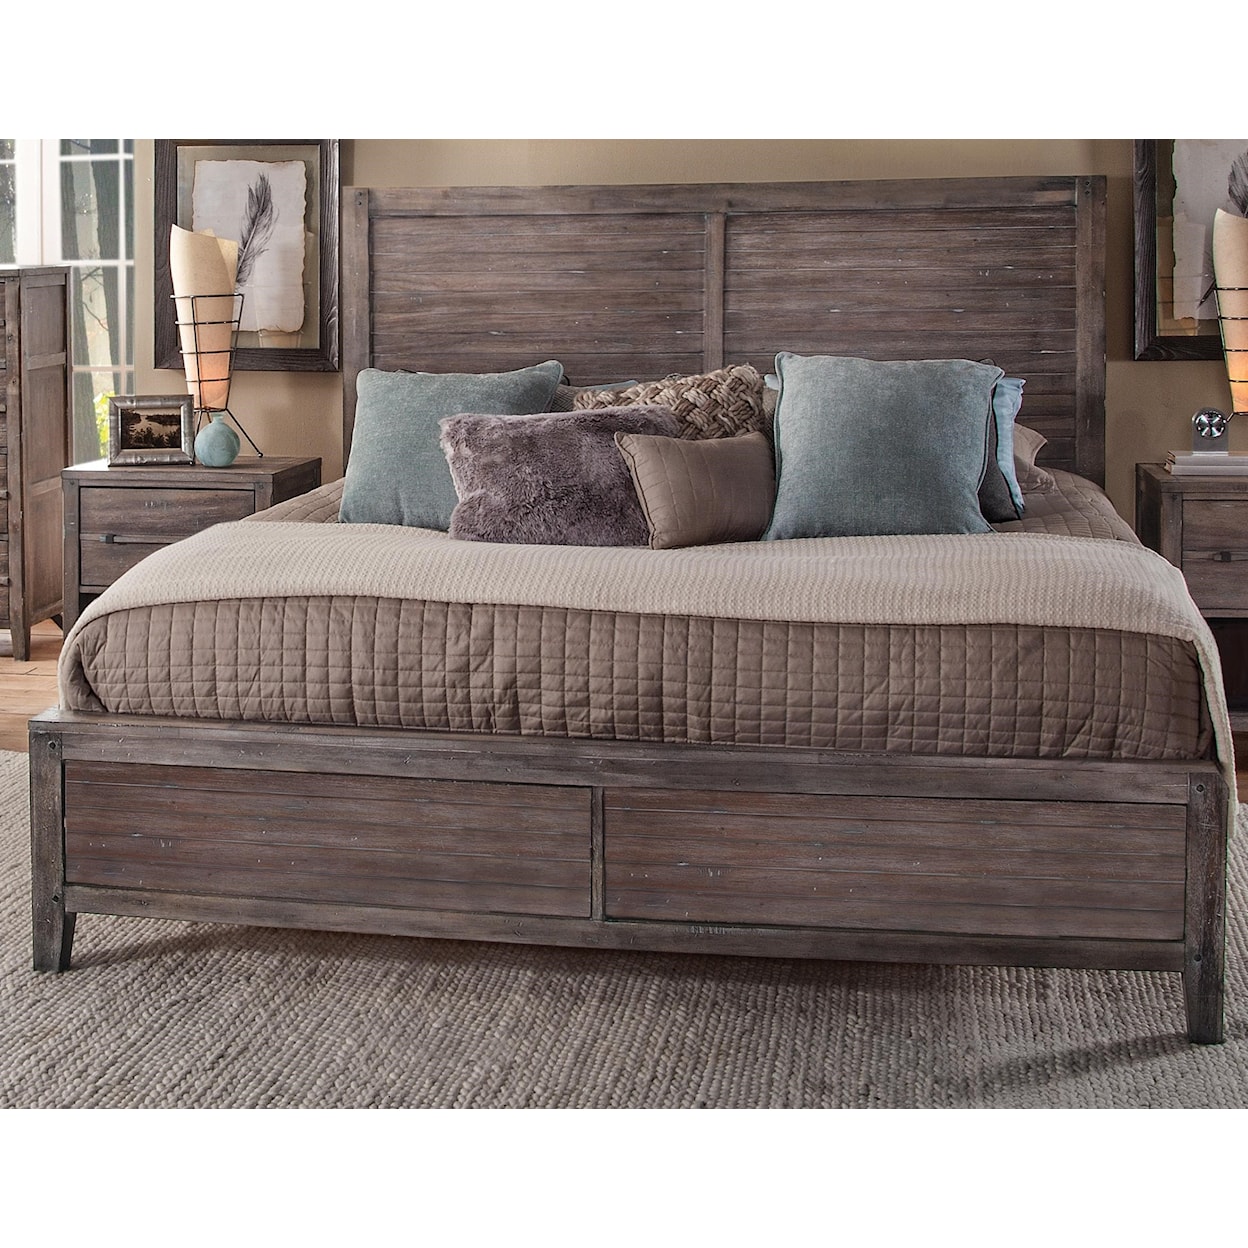 American Woodcrafters Aurora King Bed